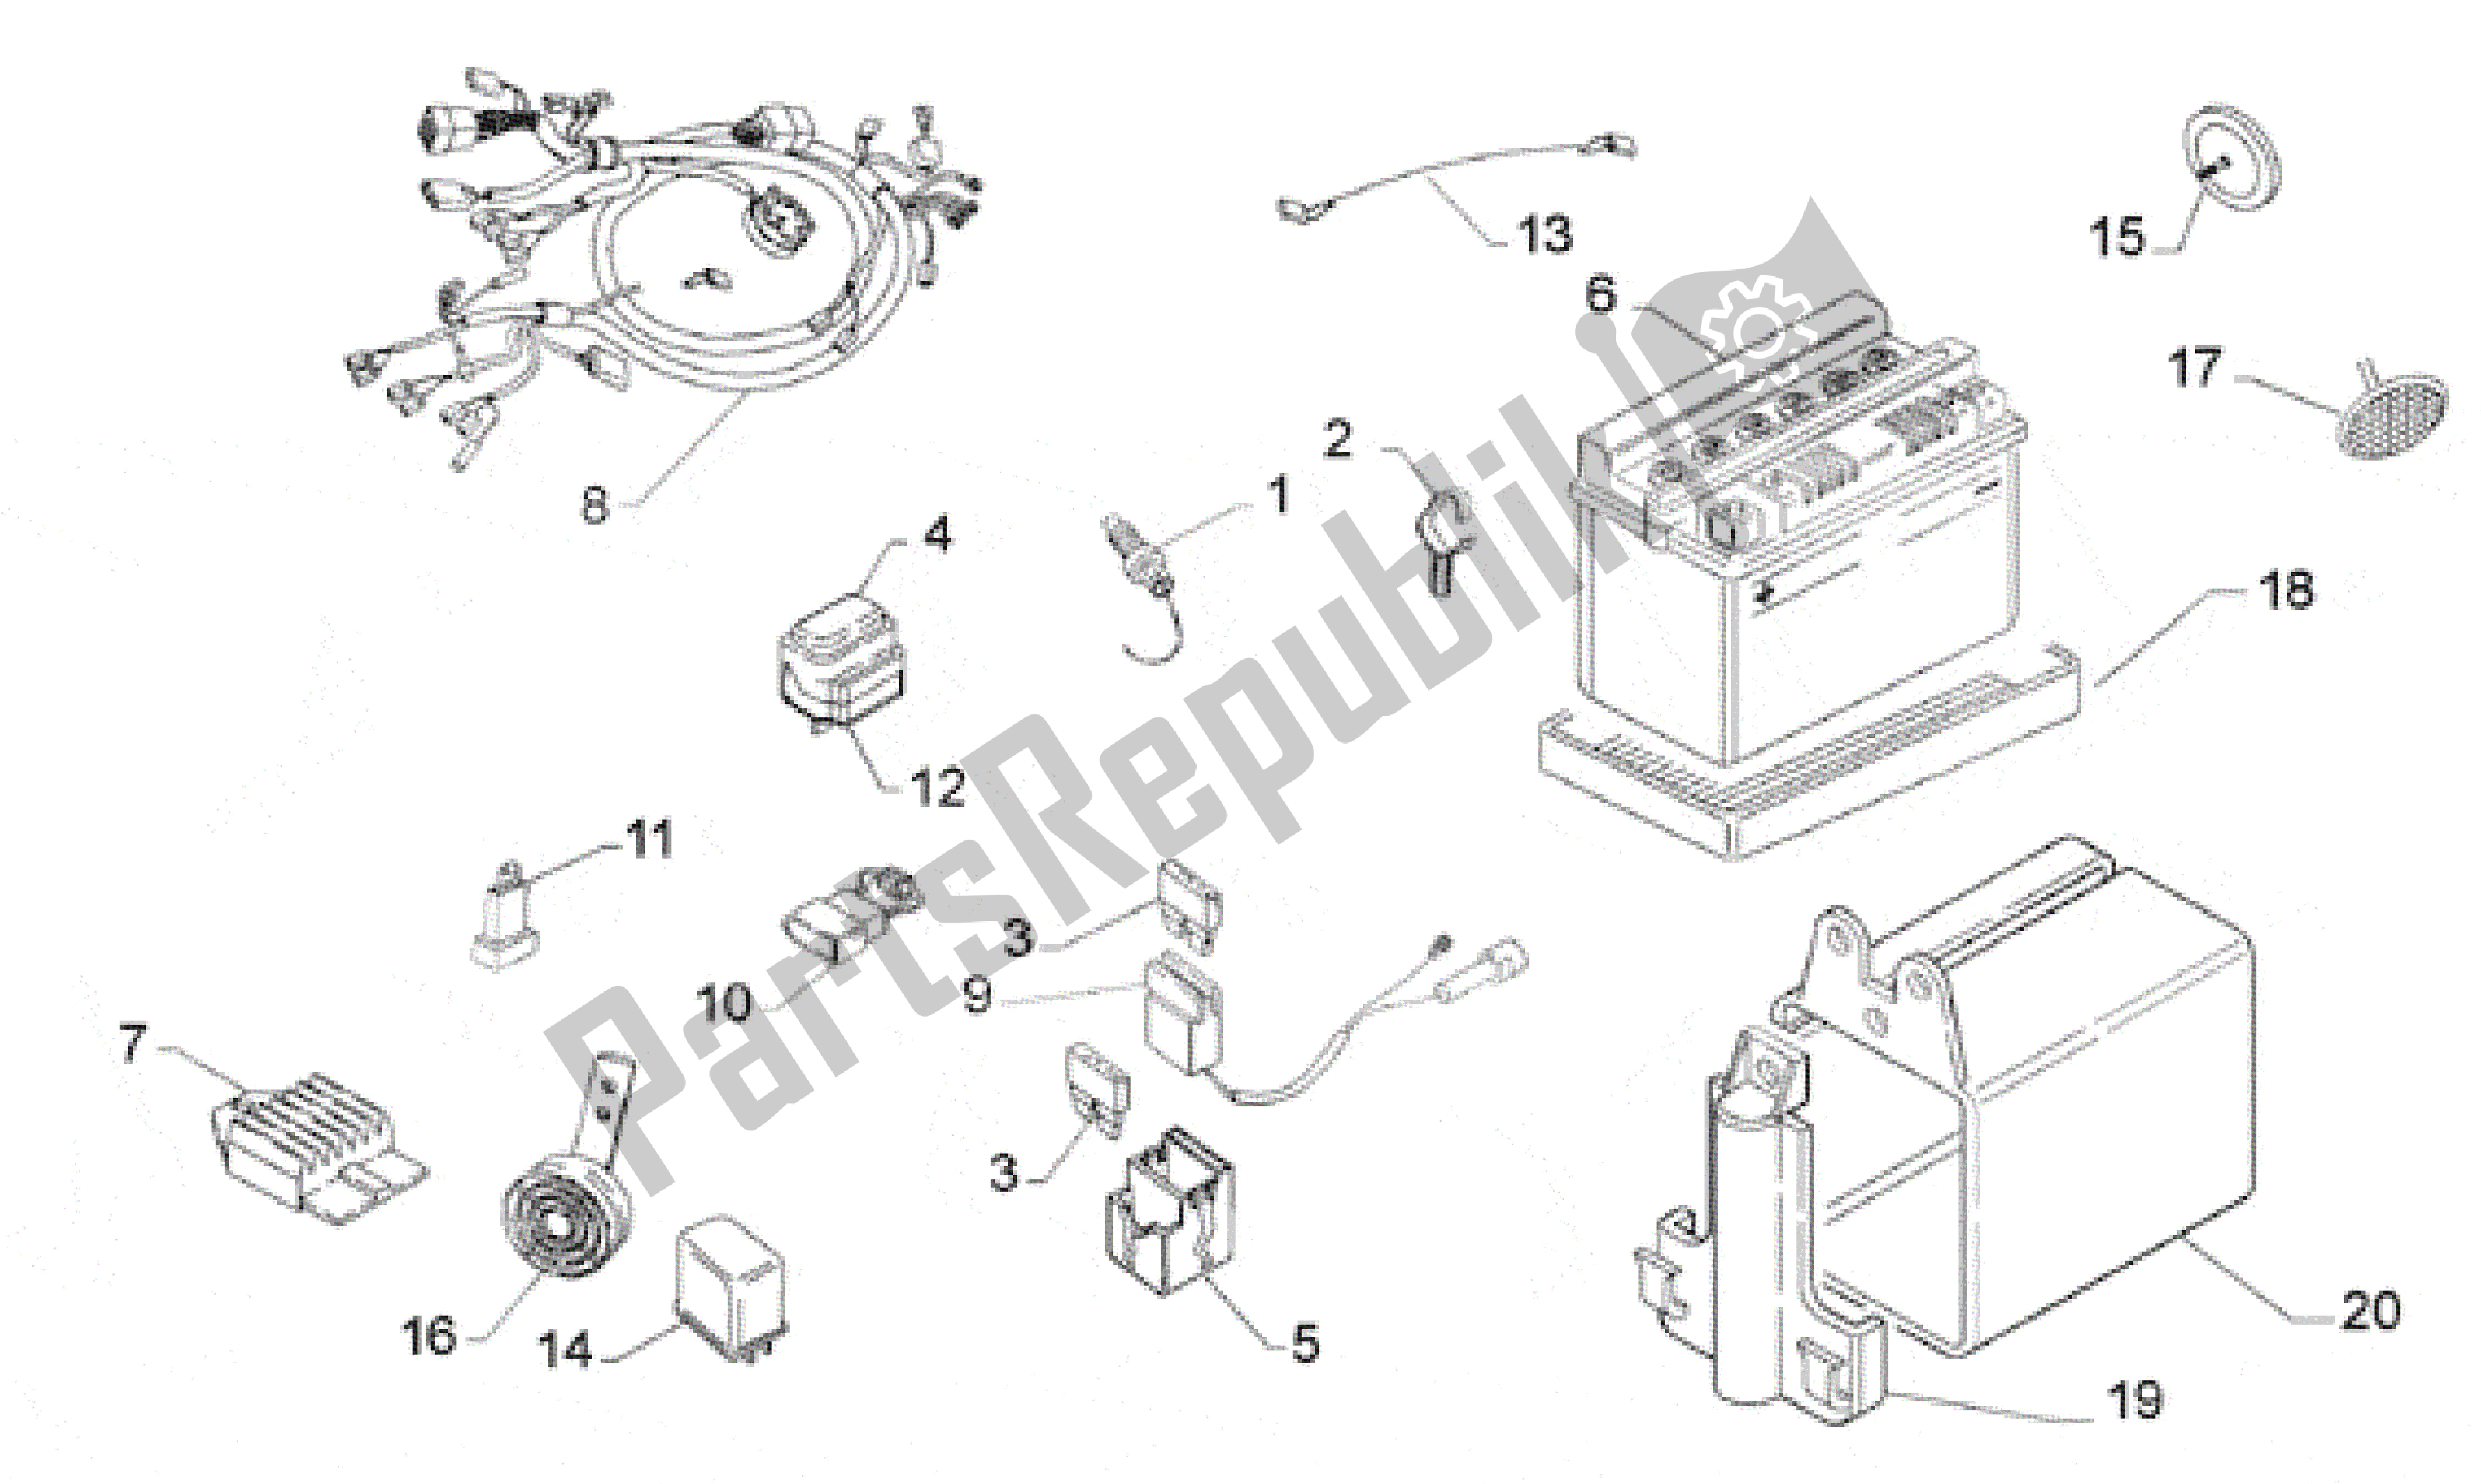 All parts for the Electrical System of the Aprilia Scarabeo 50 1993 - 1997